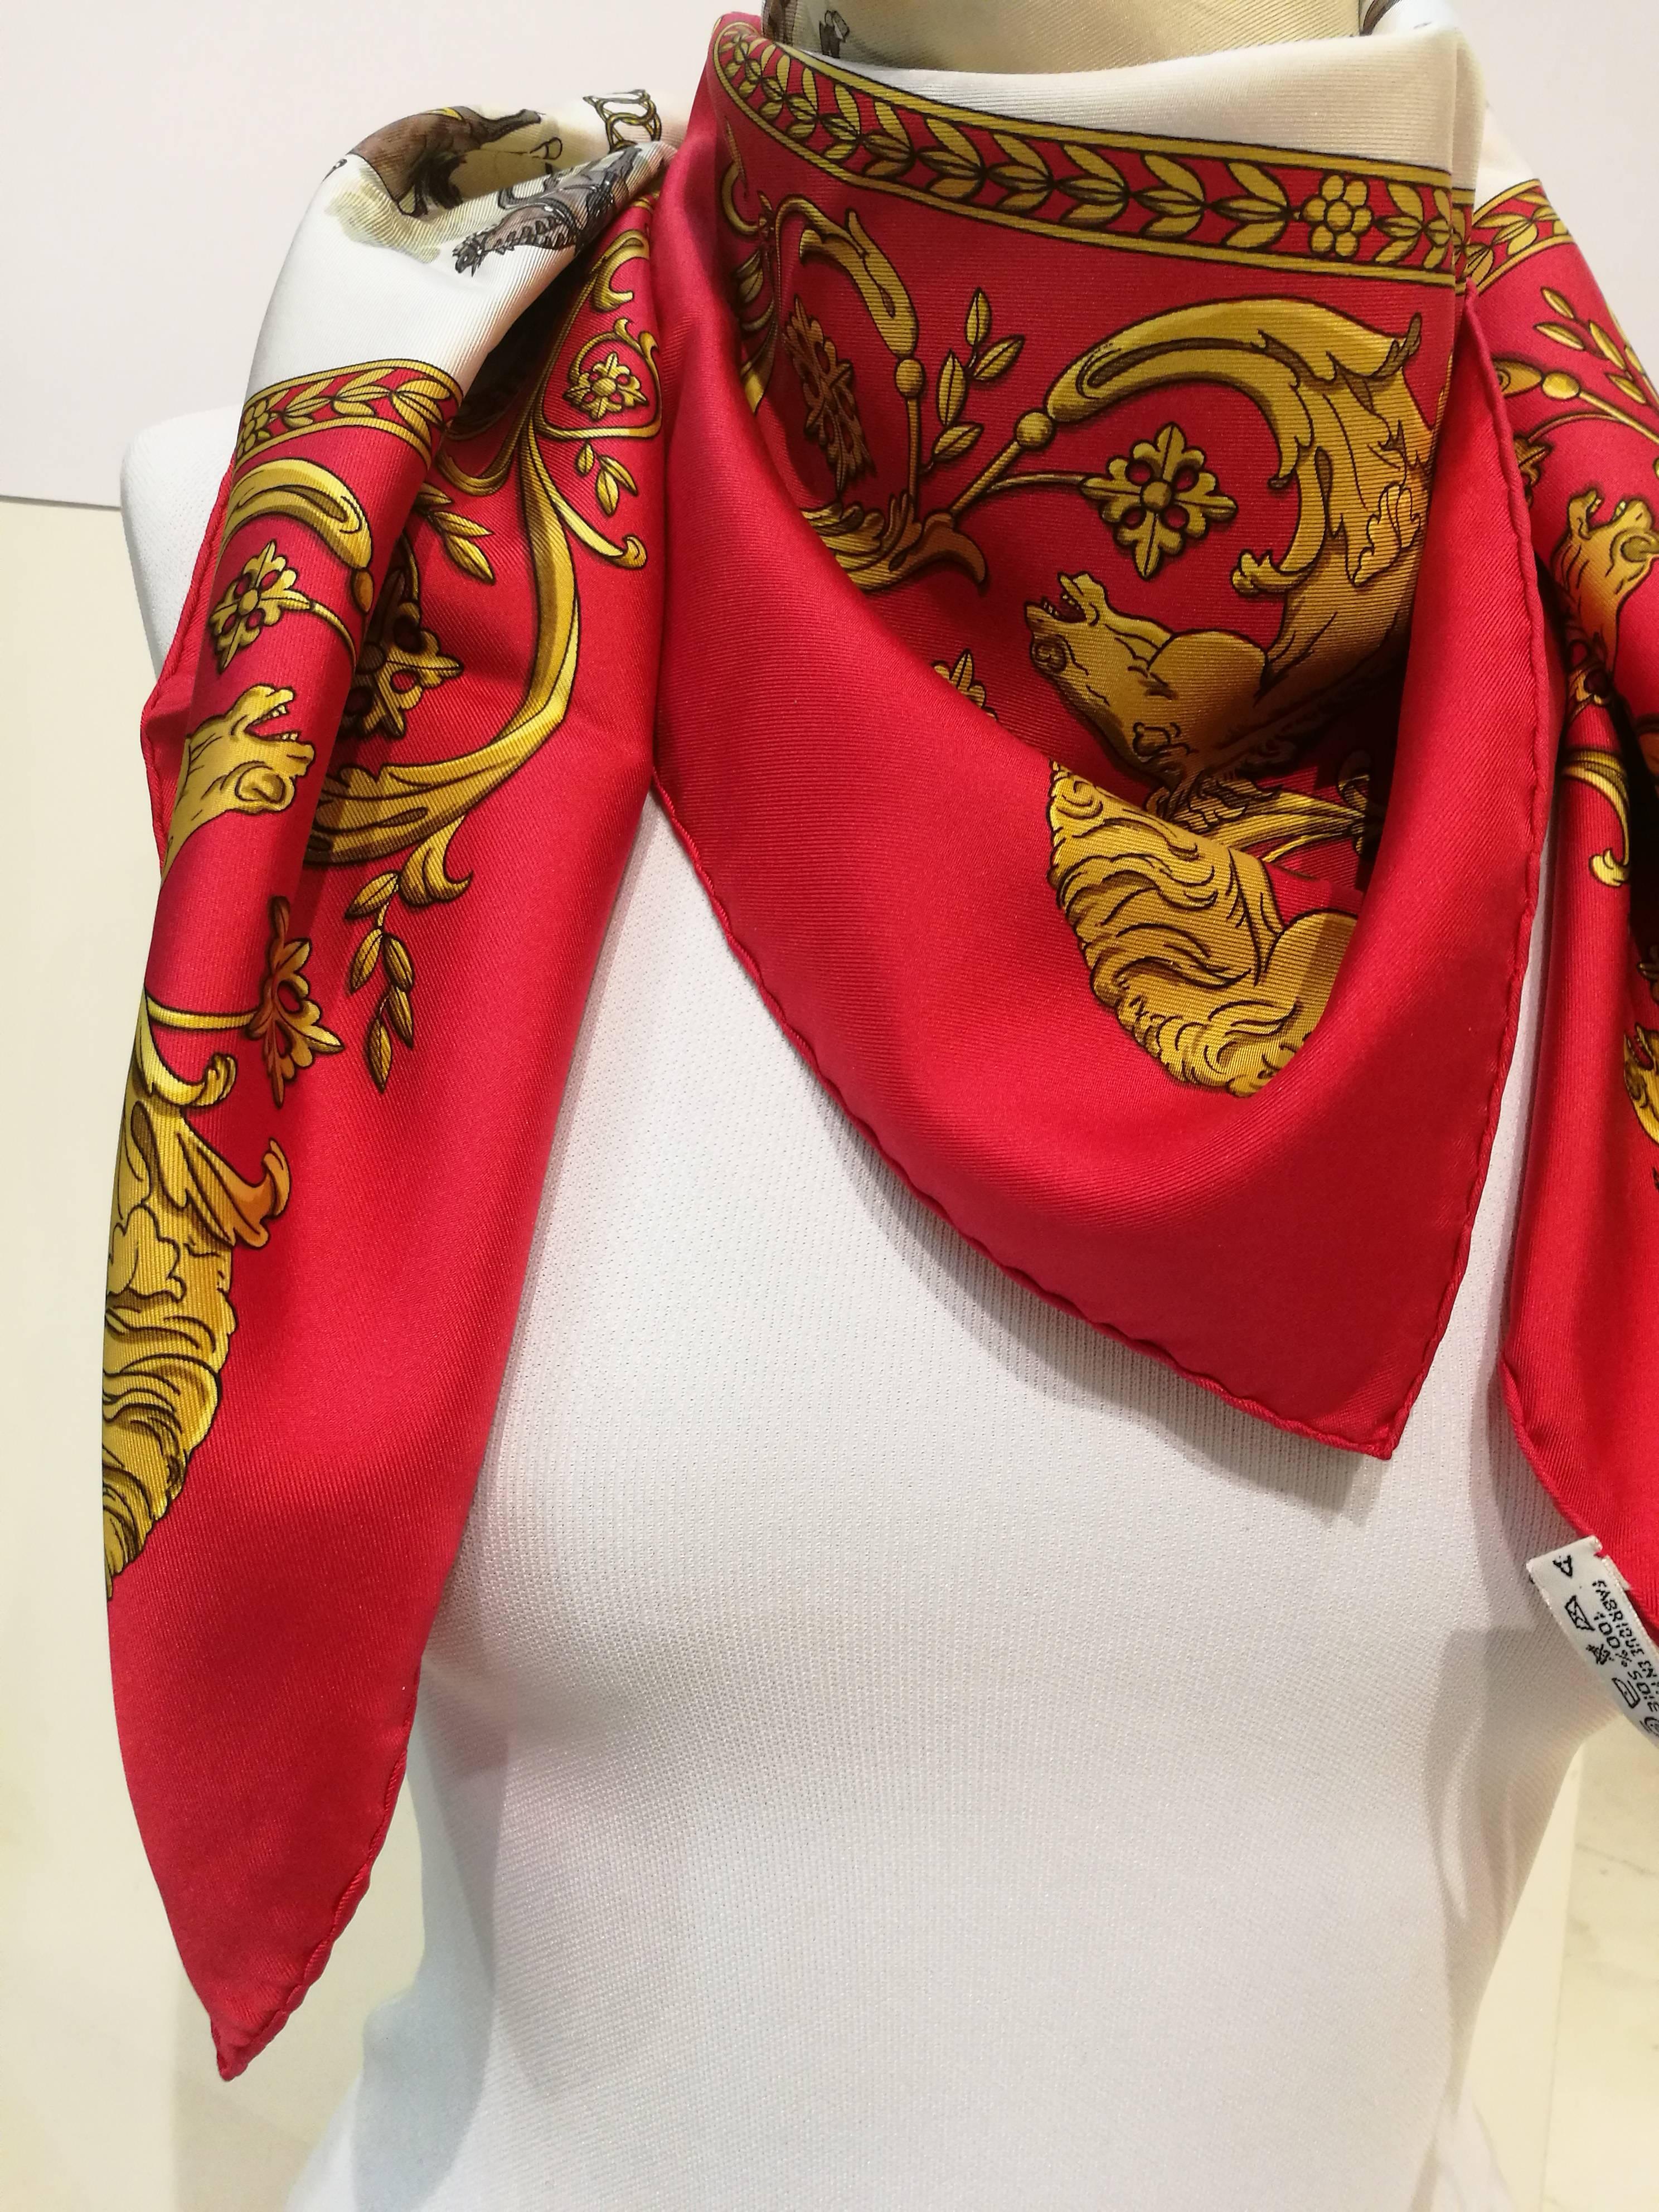 HERMES Silk La Promenade de Longchamps By Philippe Ledoux Scarf 90 
This is a sophisticated silk Hermes square scarf that features a circular arrangement of horse and carriages. Each of the designs are fascinating and it is an original and